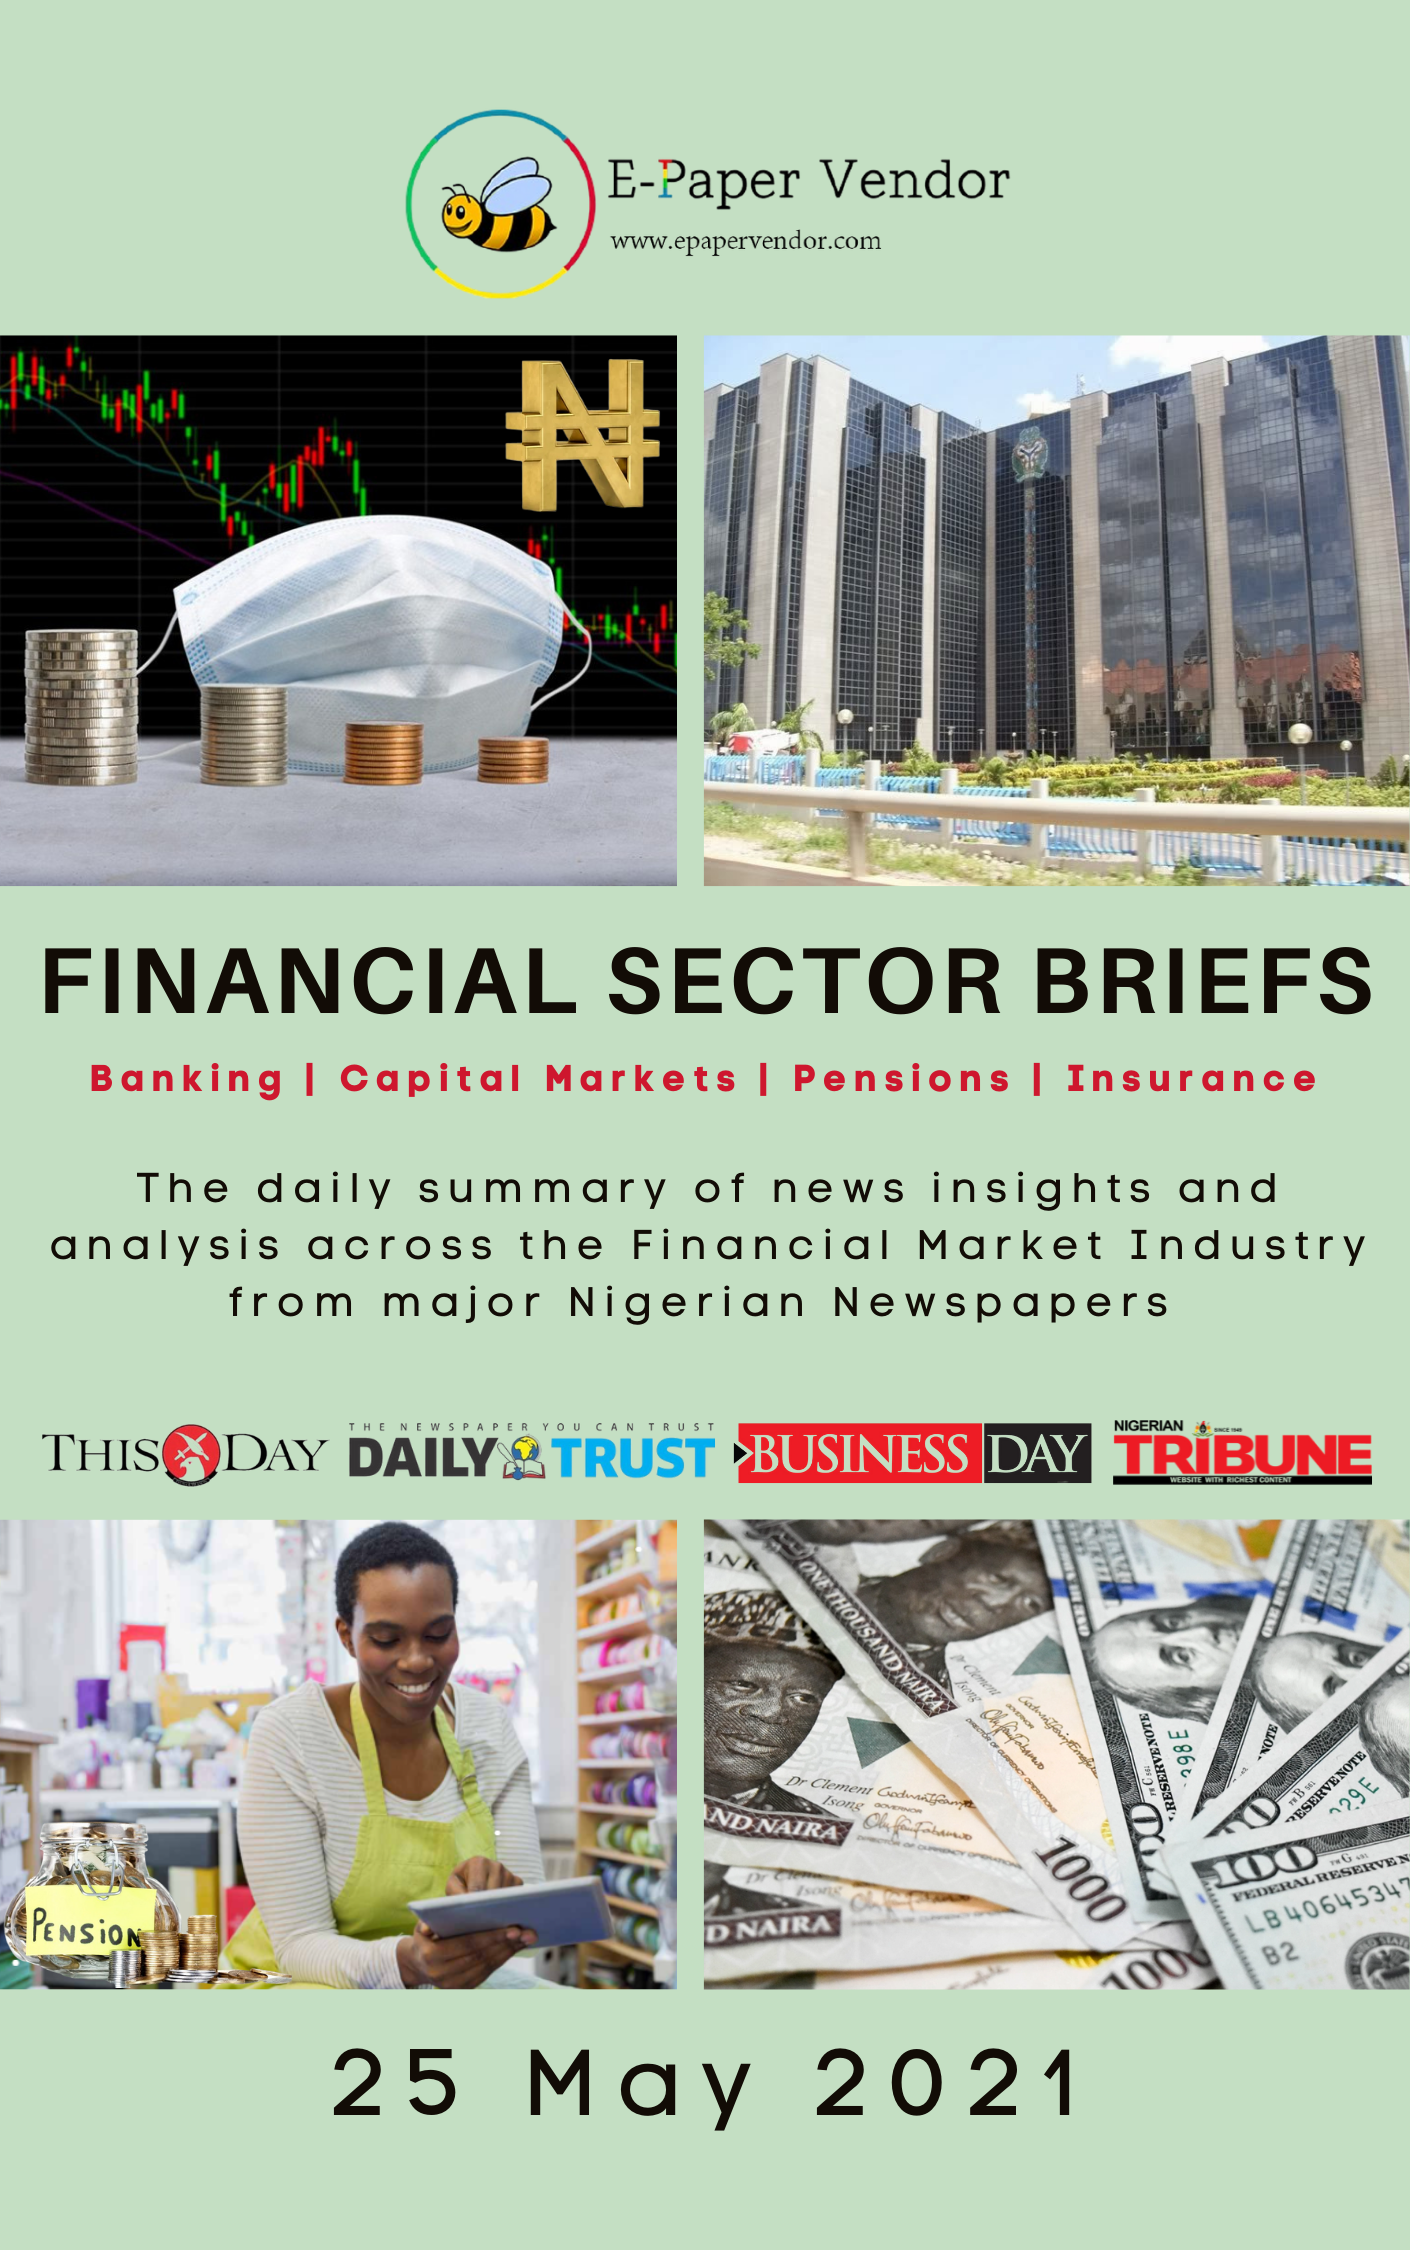 FINANCIAL SECTOR BRIEFS (25 MAY 2021)